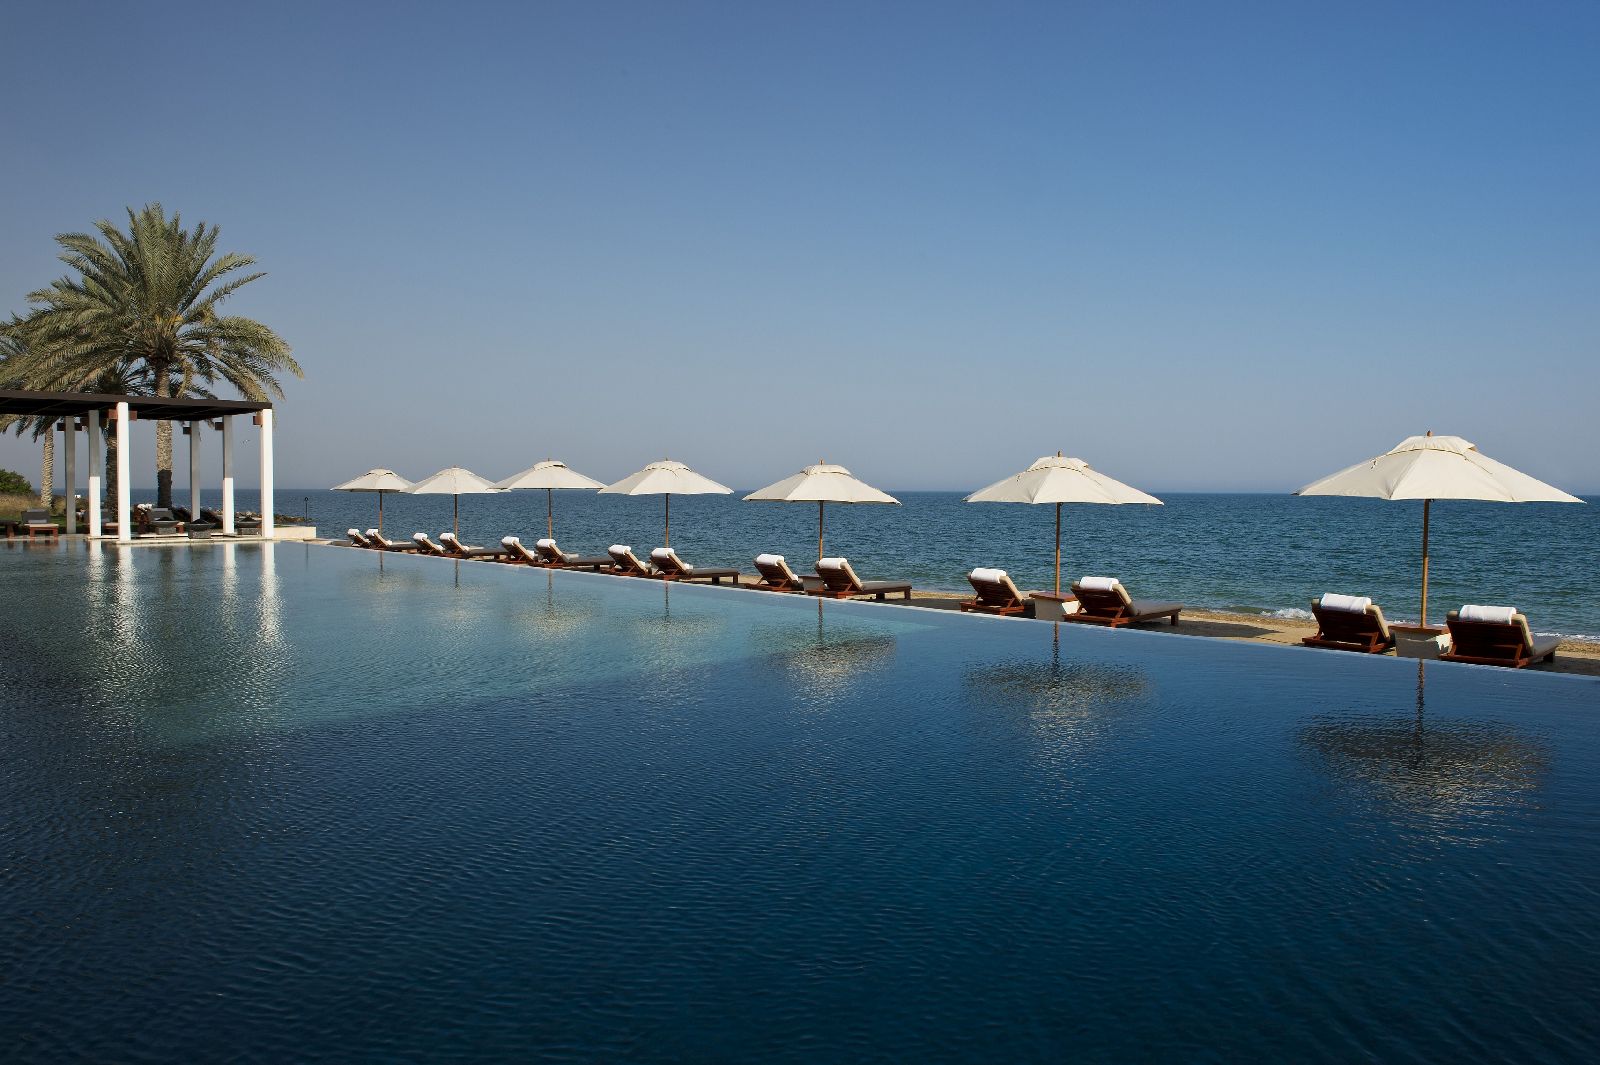 The Chedi infinity pool at the Chedi Muscat in Oman